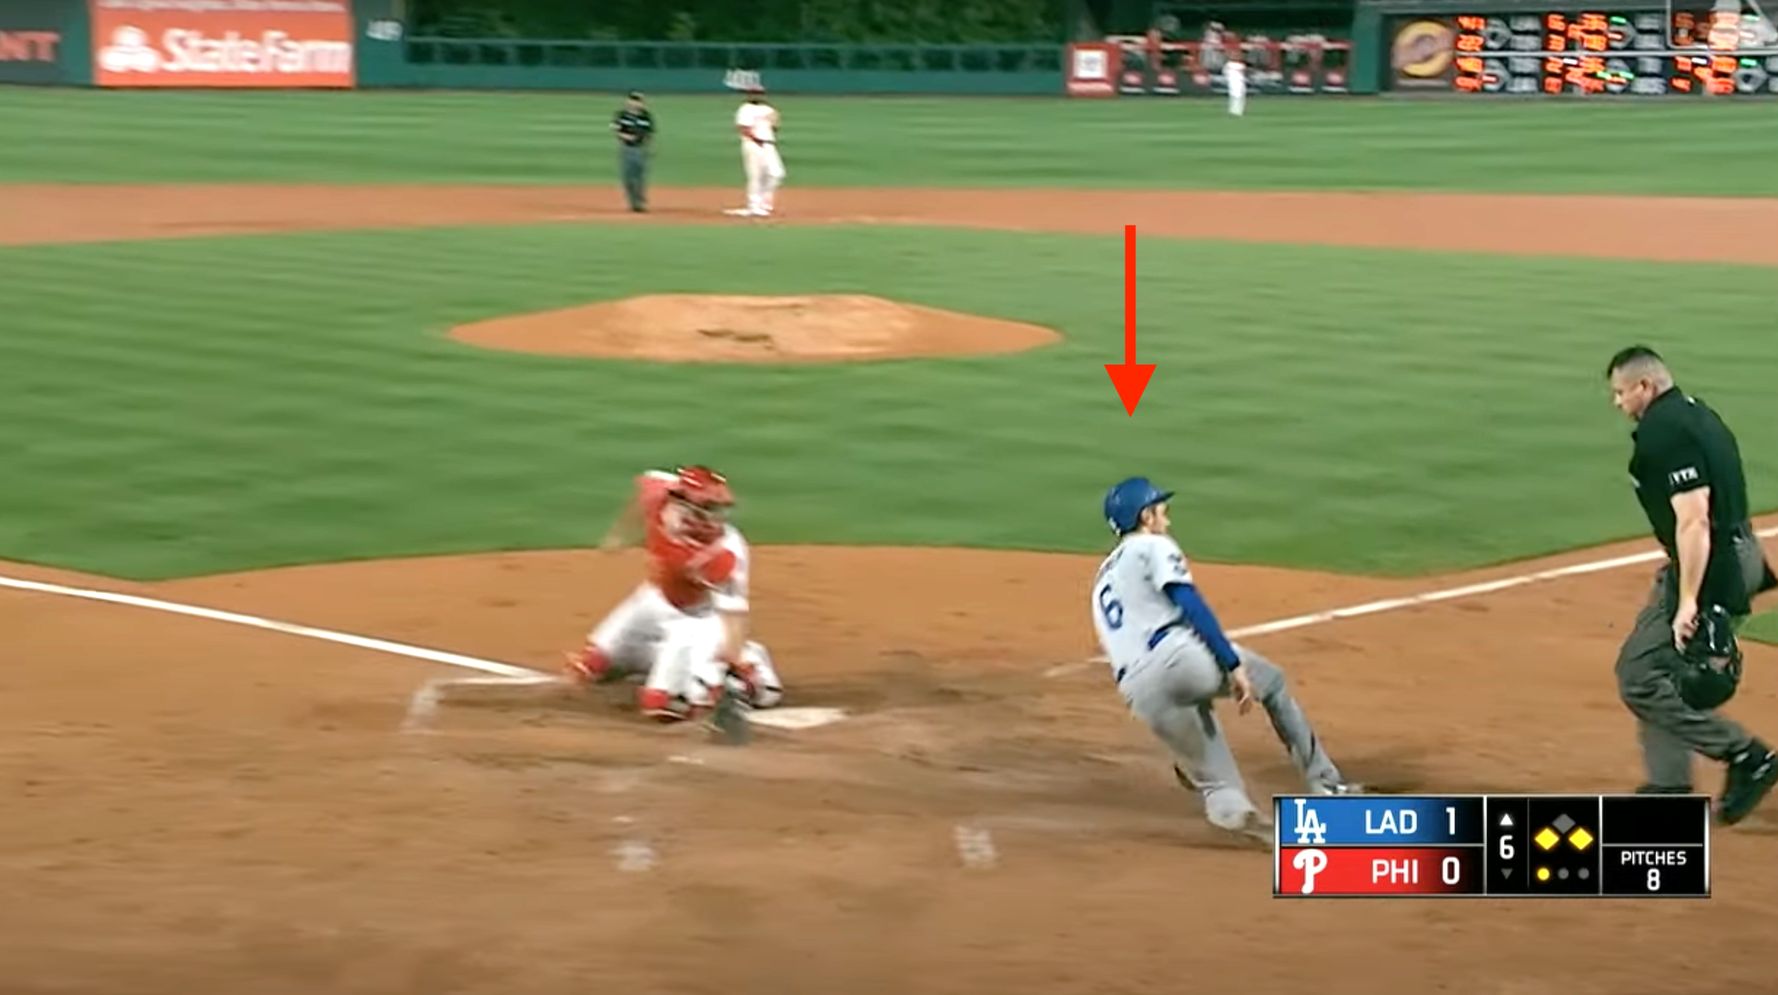 Baseball Player's Gloriously Smooth Slide Gets The Meme Treatment